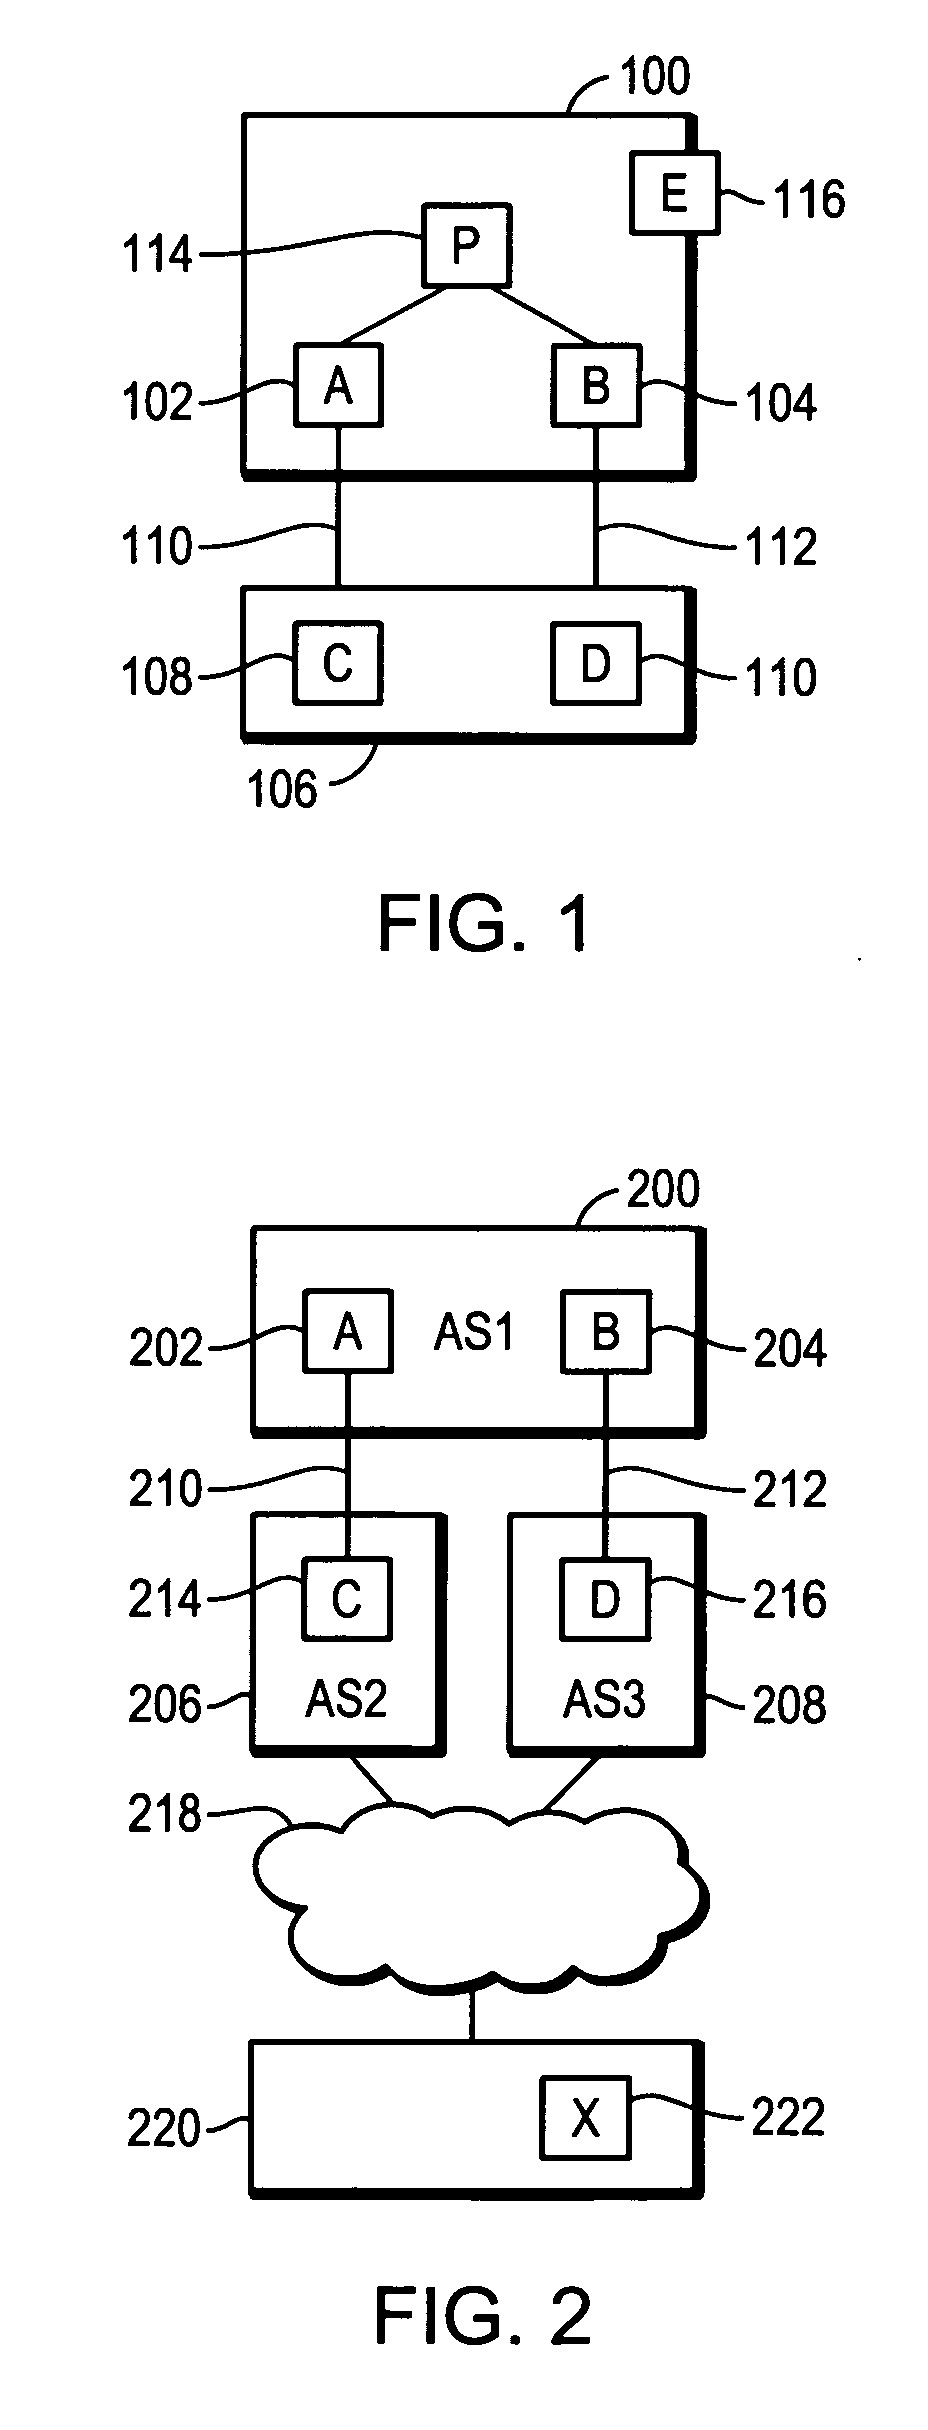 Method of constructing a backup path in an autonomous system